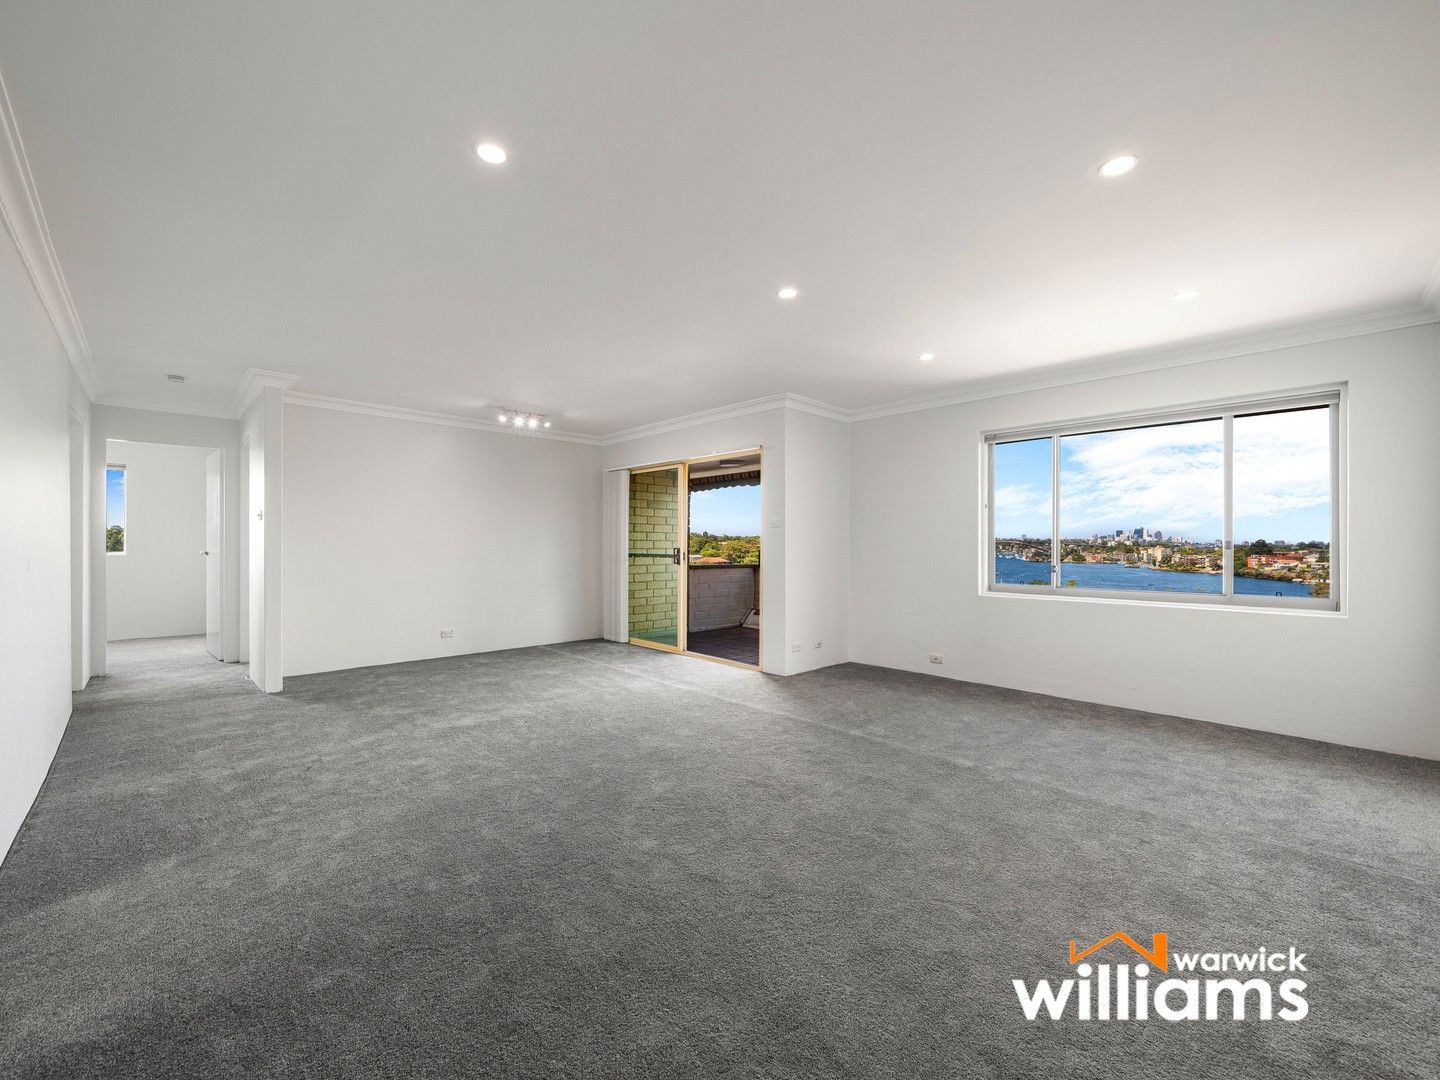 2 bedrooms Apartment / Unit / Flat in 12/37 Walton Crescent ABBOTSFORD NSW, 2046